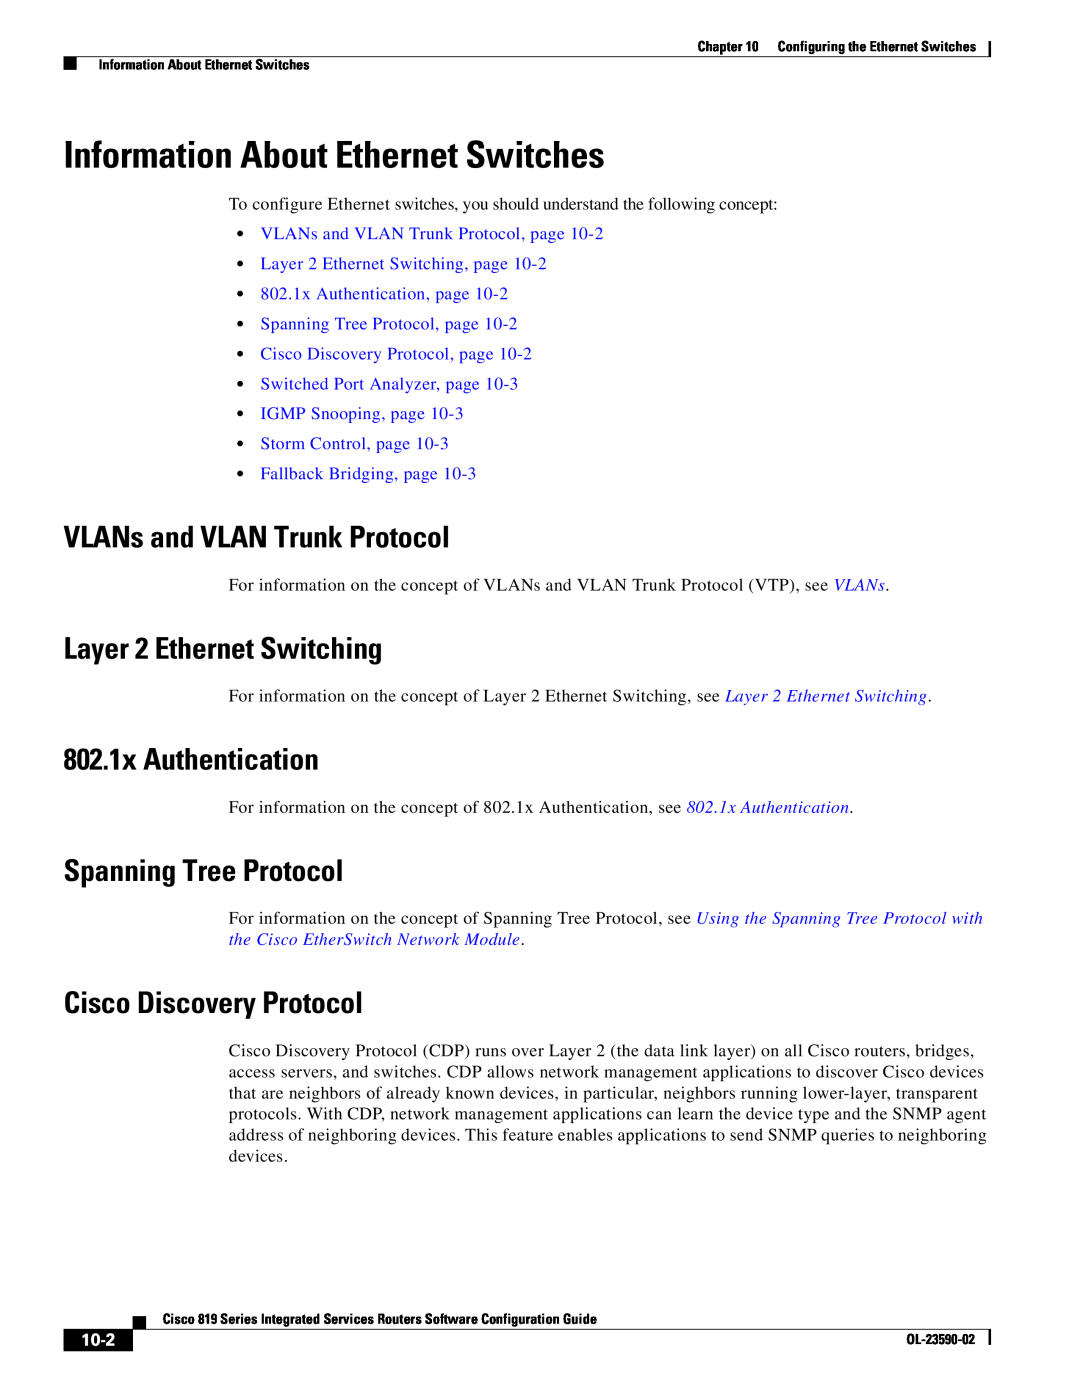 Cisco Systems C819GUK9 Information About Ethernet Switches, VLANs and VLAN Trunk Protocol, Layer 2 Ethernet Switching 